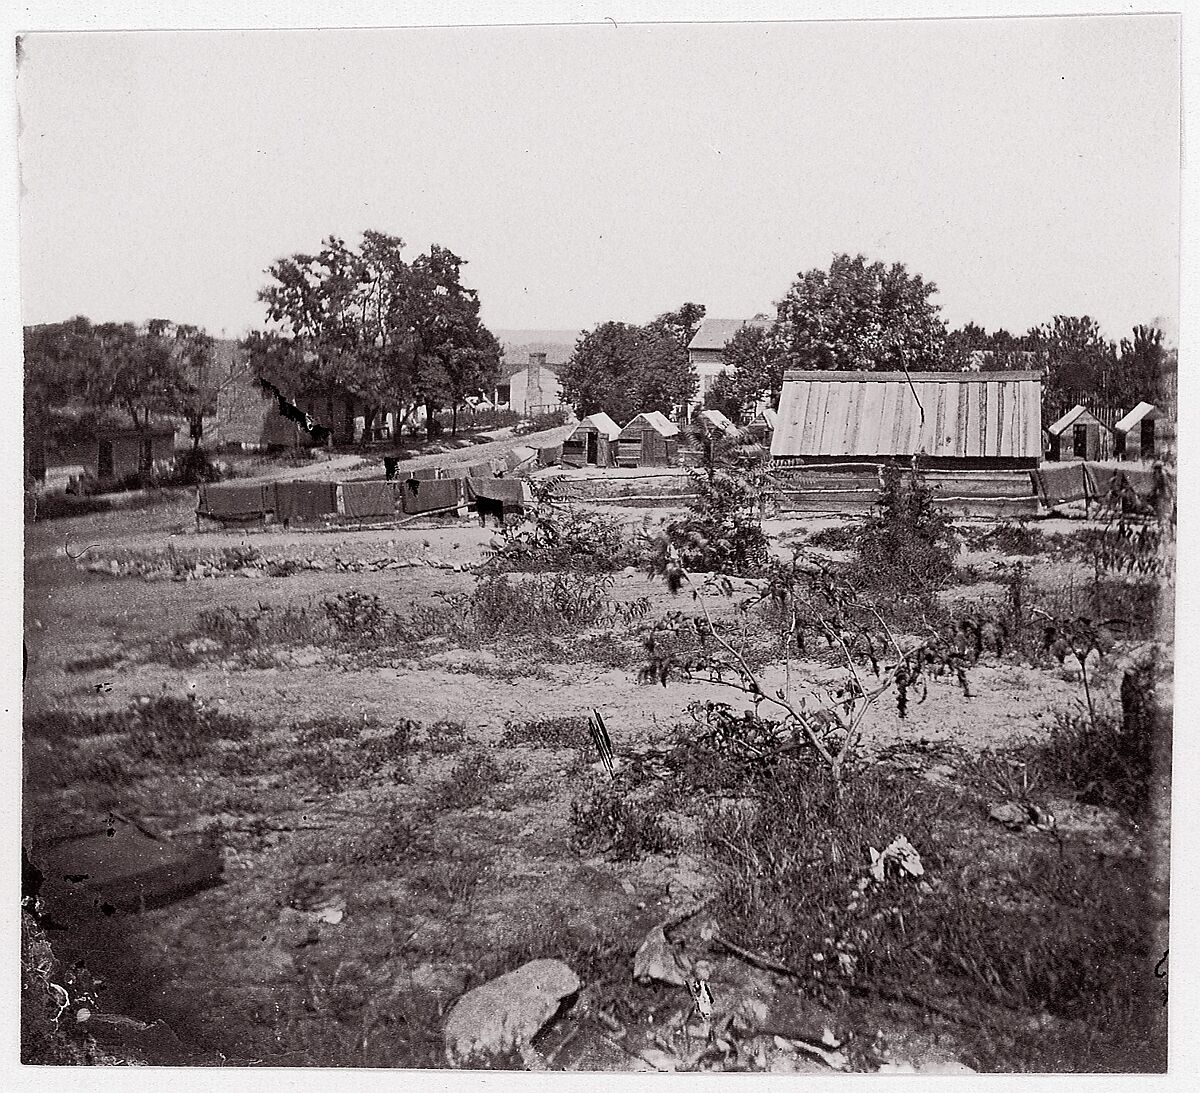 [View of a small town with wooden sheds in distance].  Brady album, p. 123, Unknown (American), Albumen silver print from glass negative 